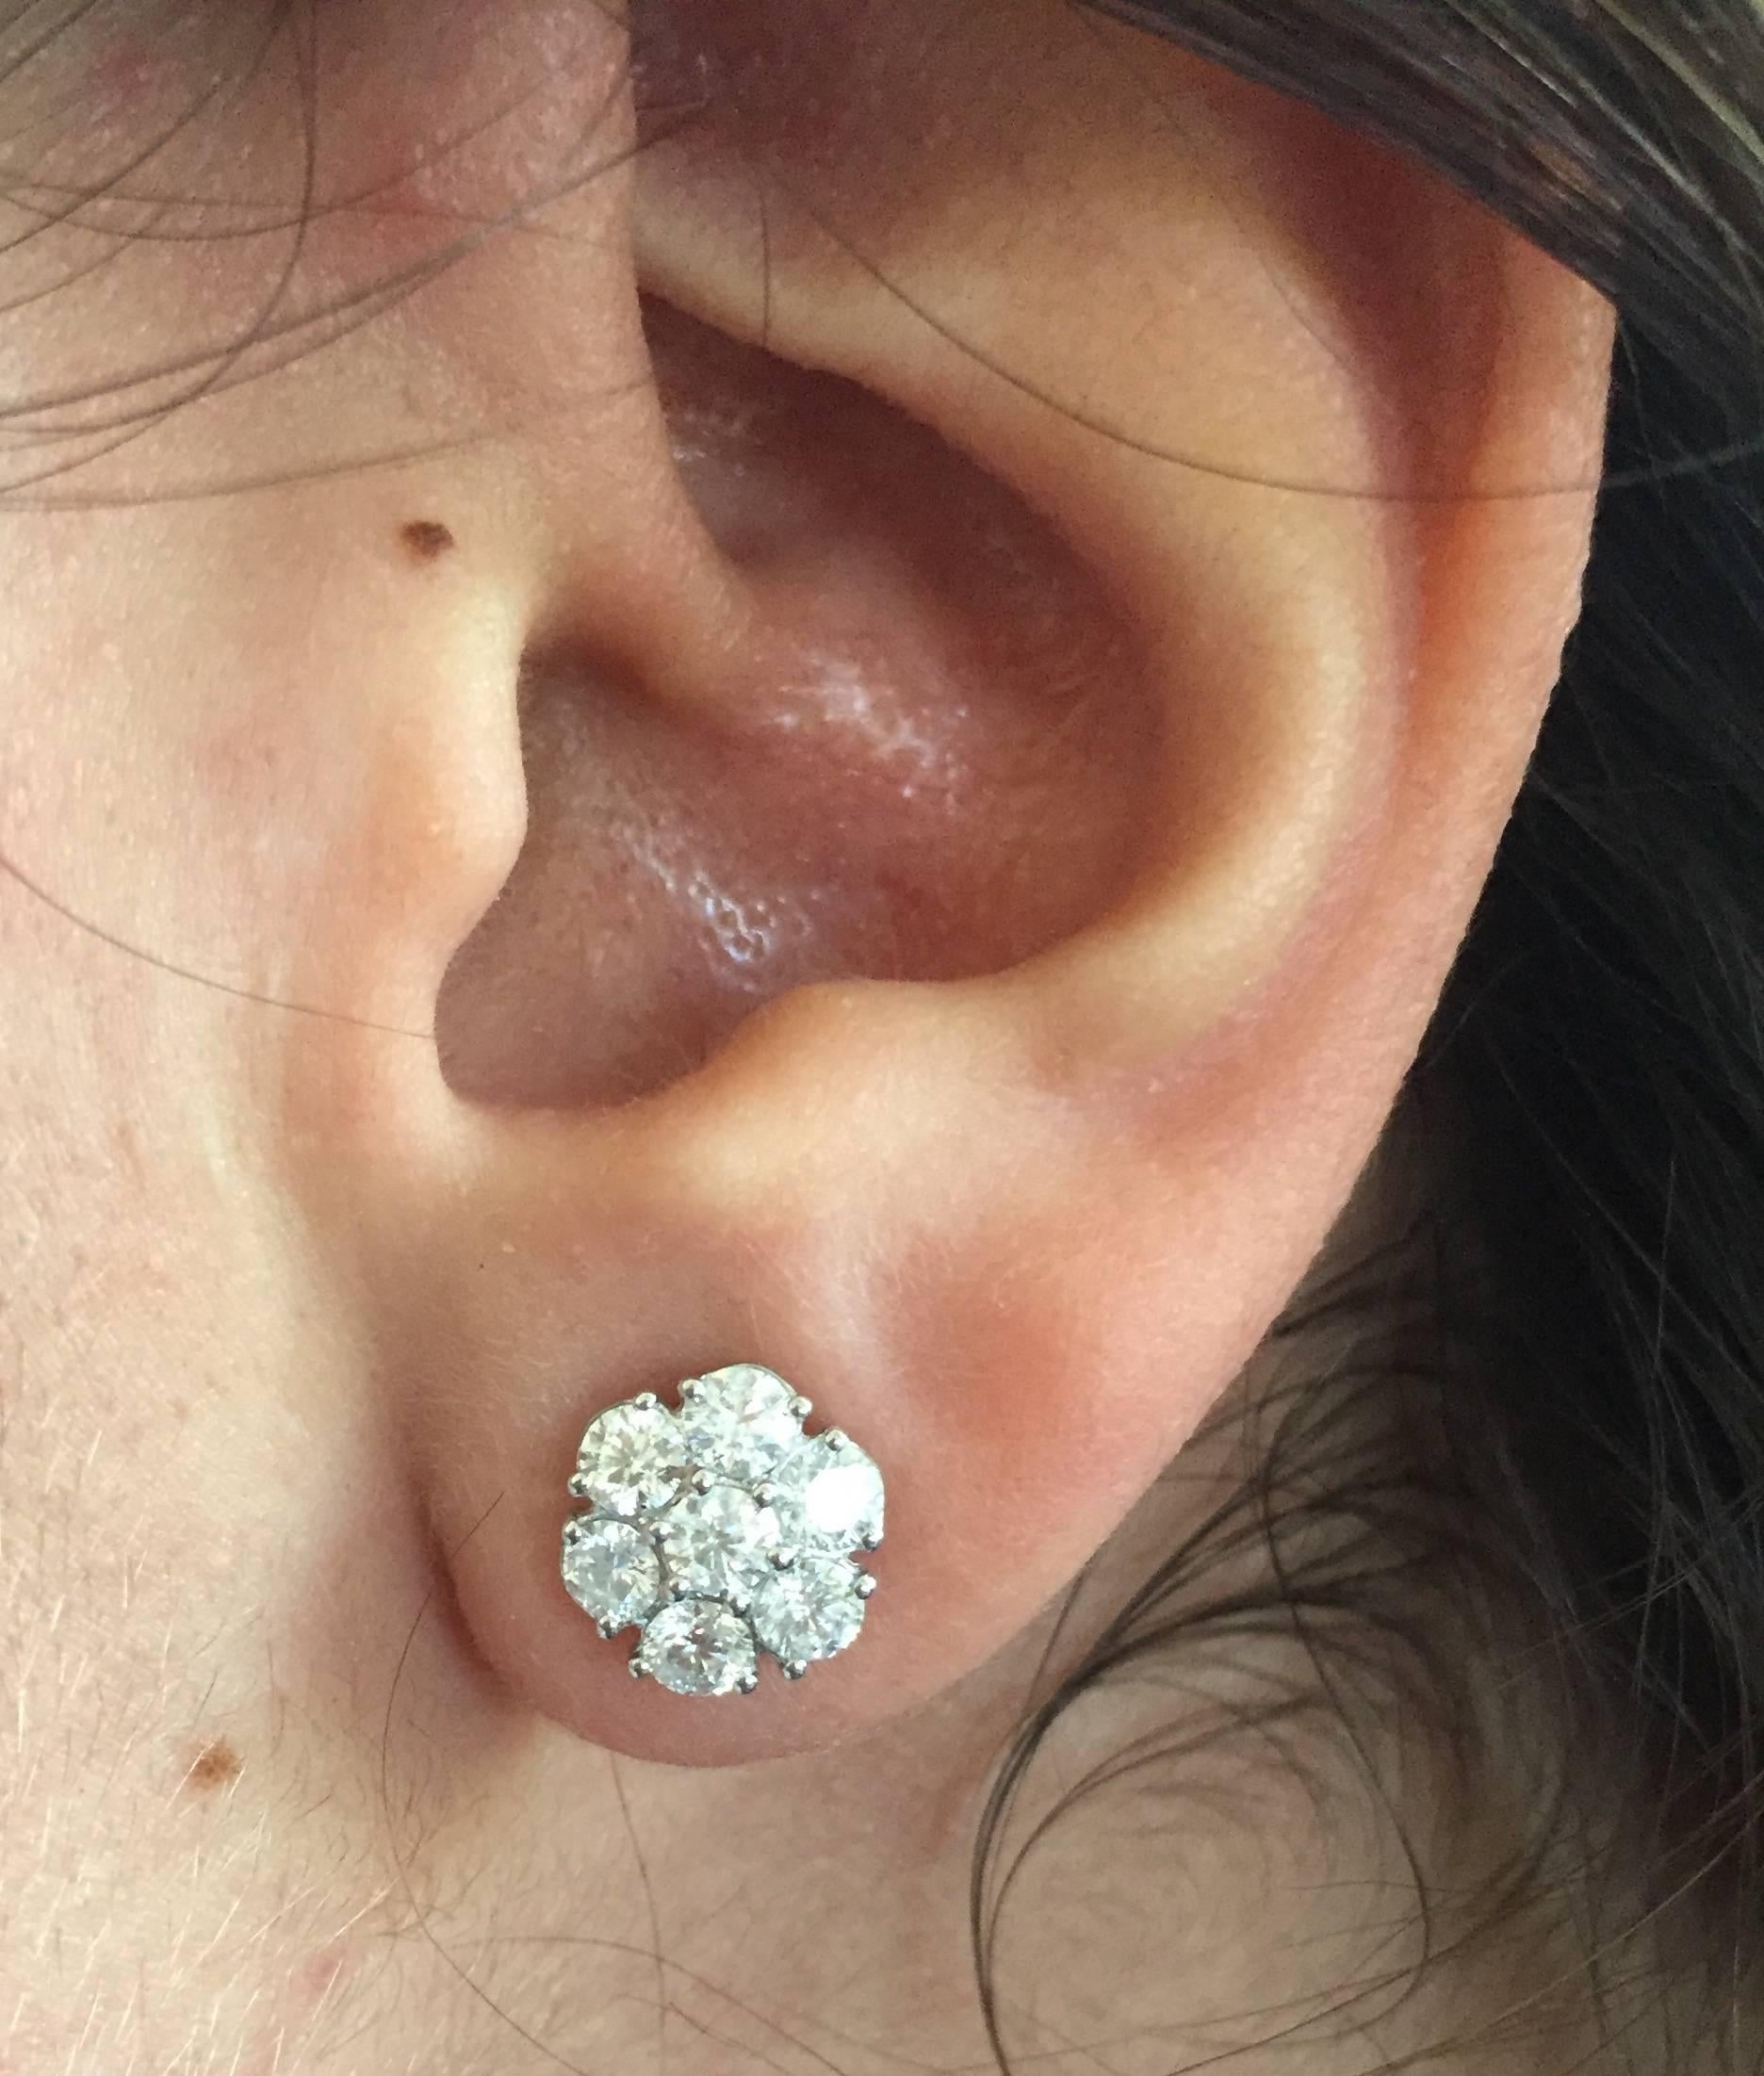 These gorgeous Cluster Earrings are a must have piece to add to your jewelry collection. Any look or occasion can be tied together with these timeless earrings. The carat weight is 3.21, the color is G, and the clarity is SI.